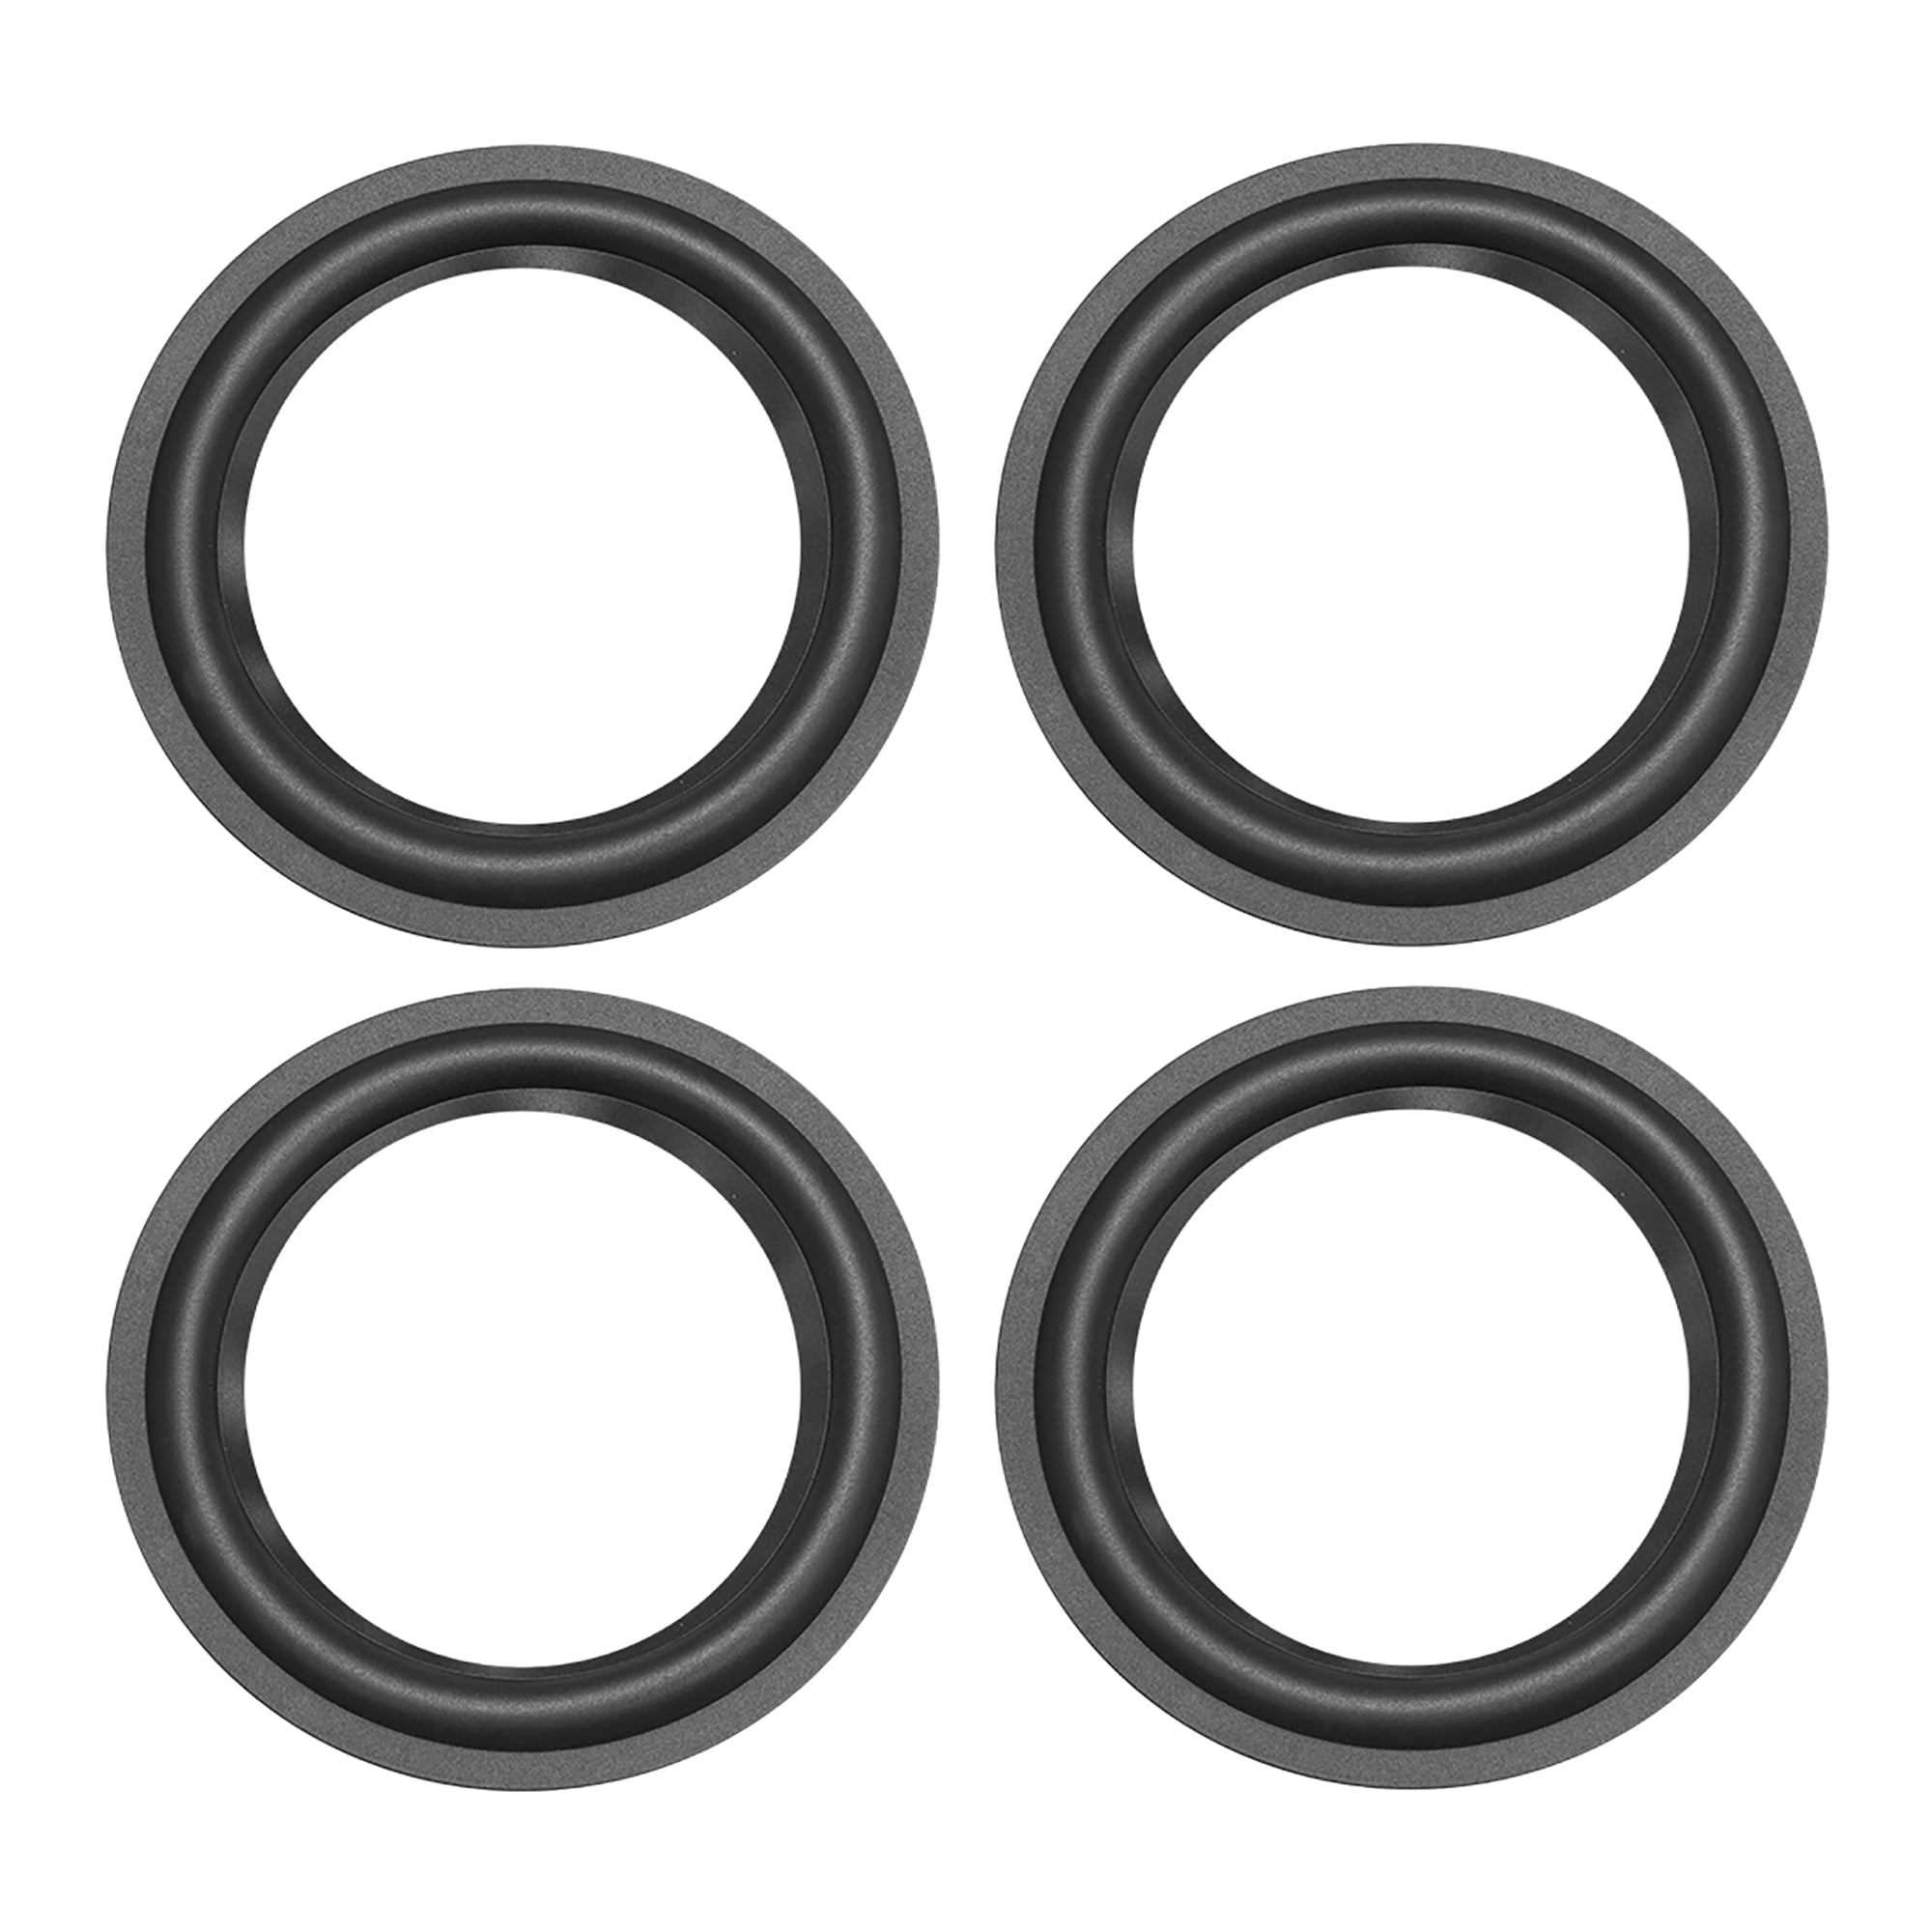 uxcell 6.5 inches 6.5 inches Speaker Foam Edge Surround Rings Replacement Parts for Speaker Repair or DIY 4pcs